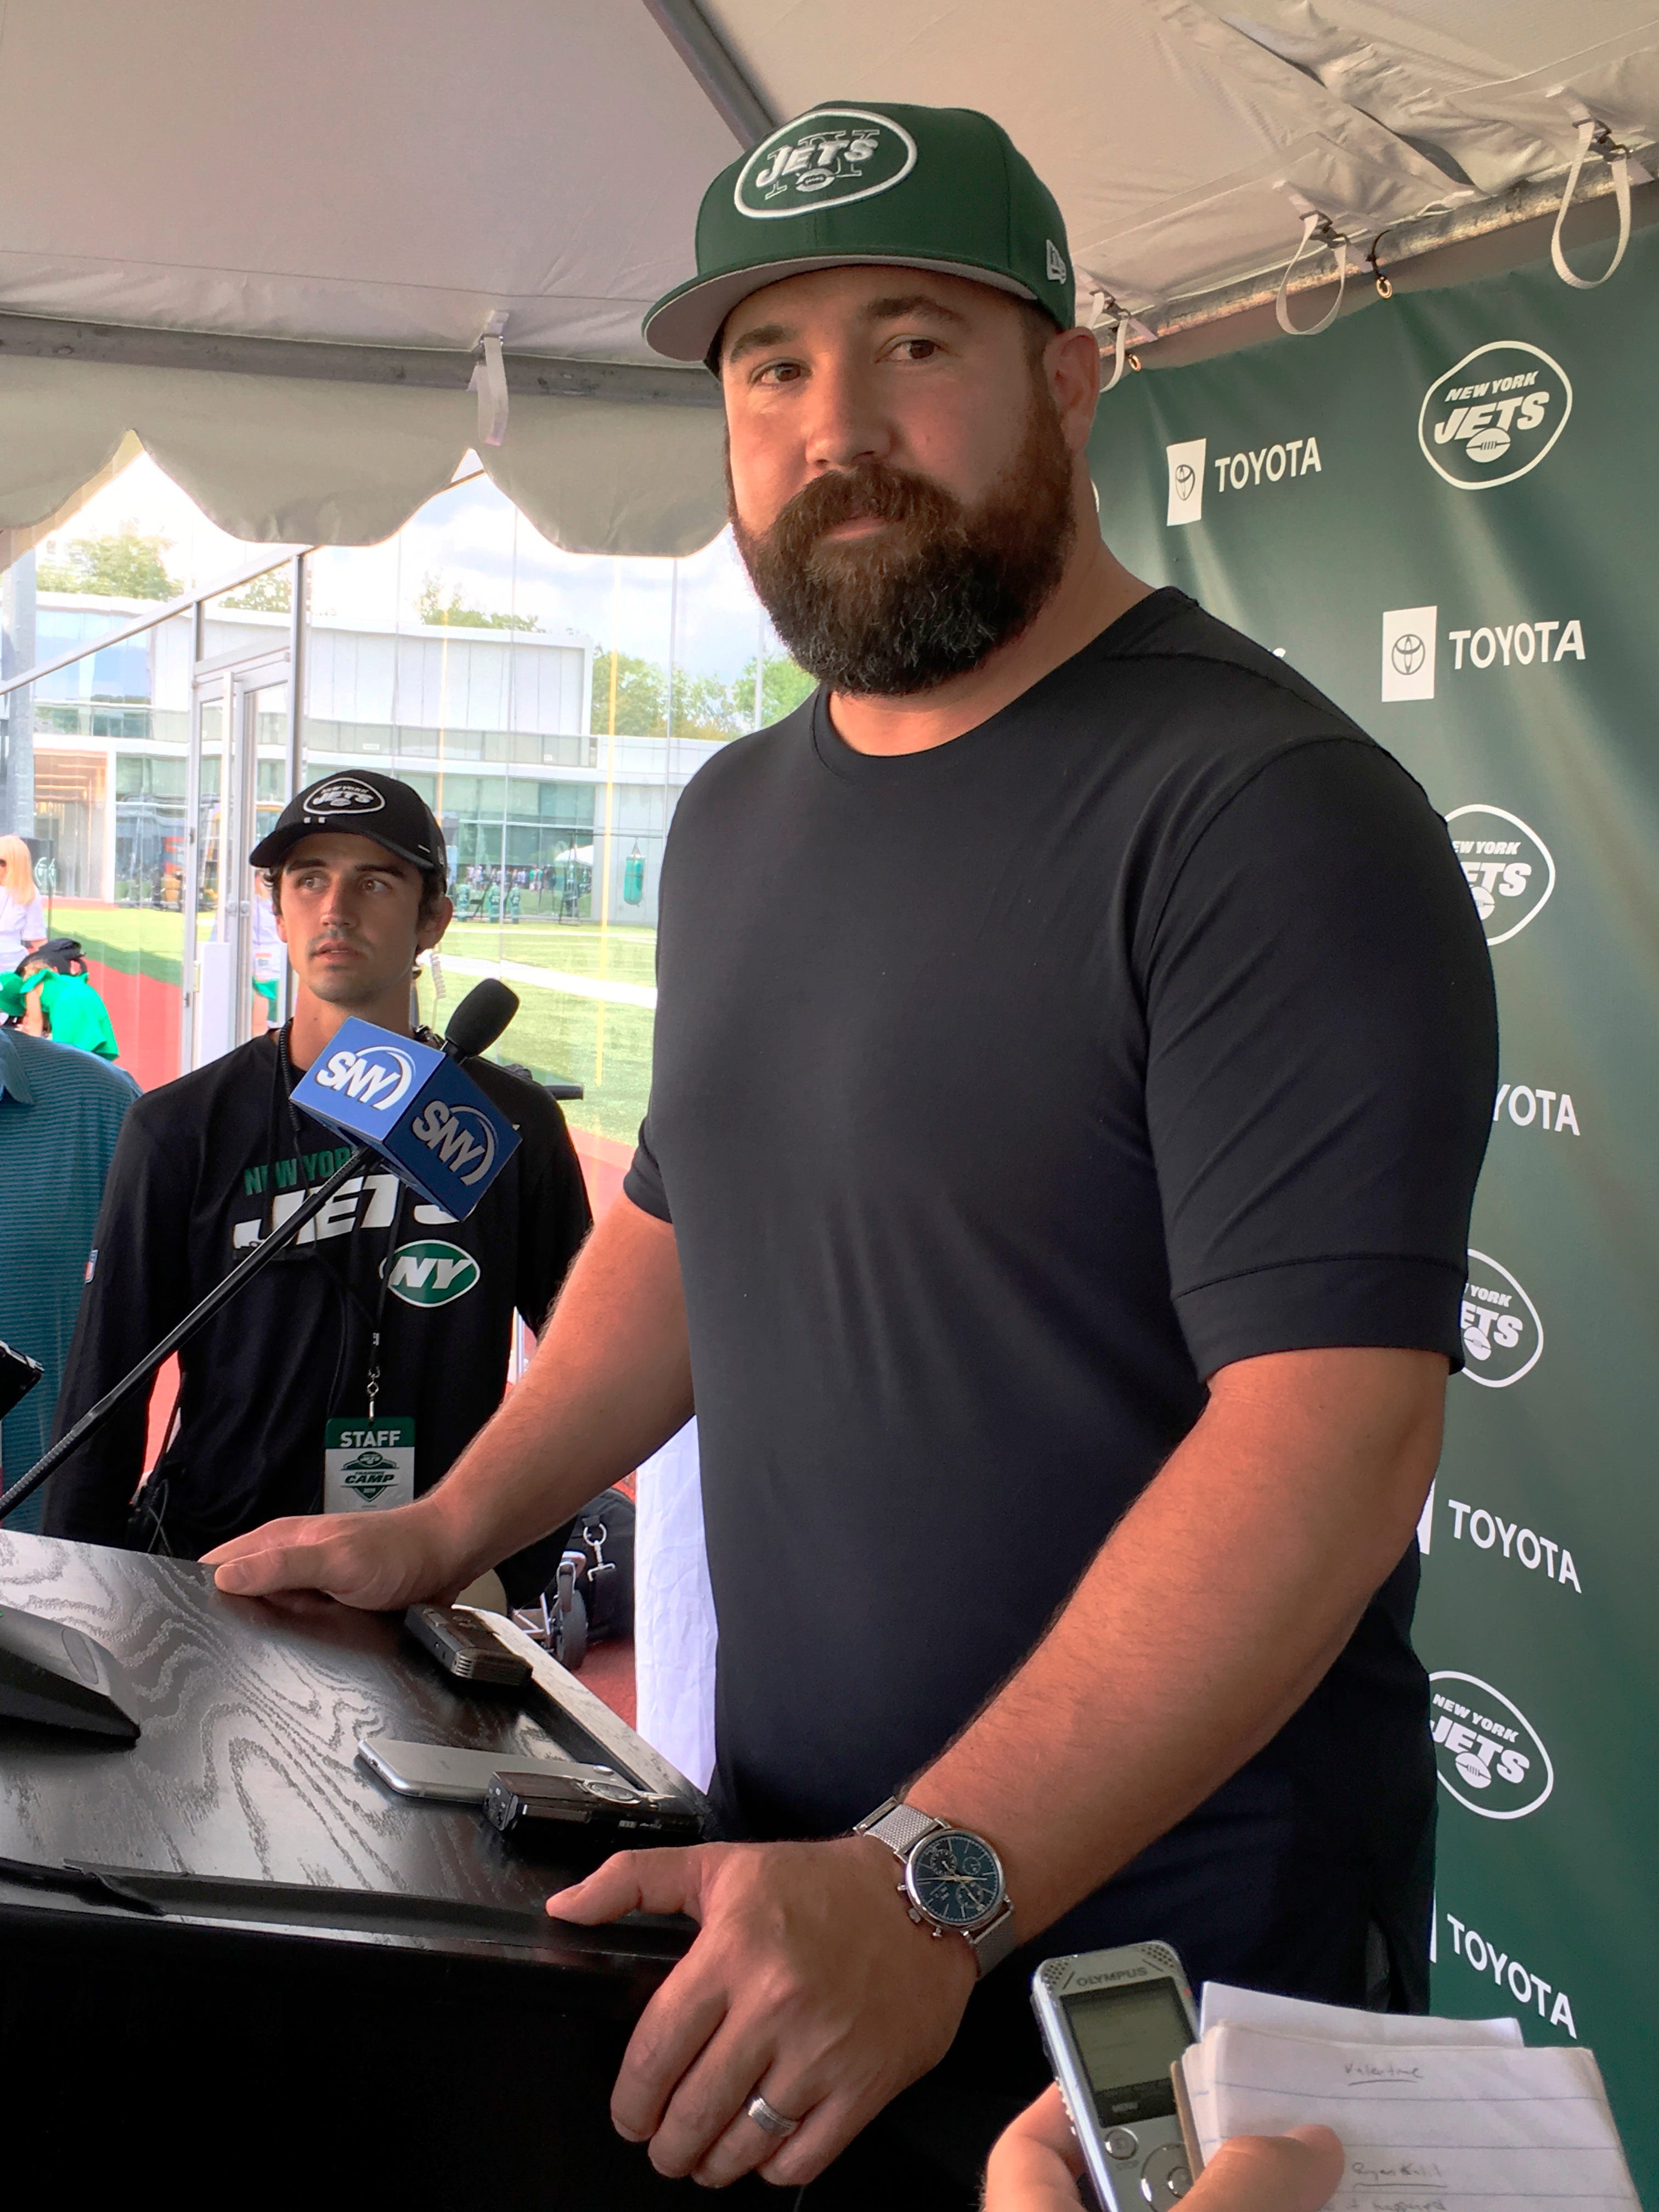 Jets' Ryan Kalil needed to scratch 'the itch' to play again